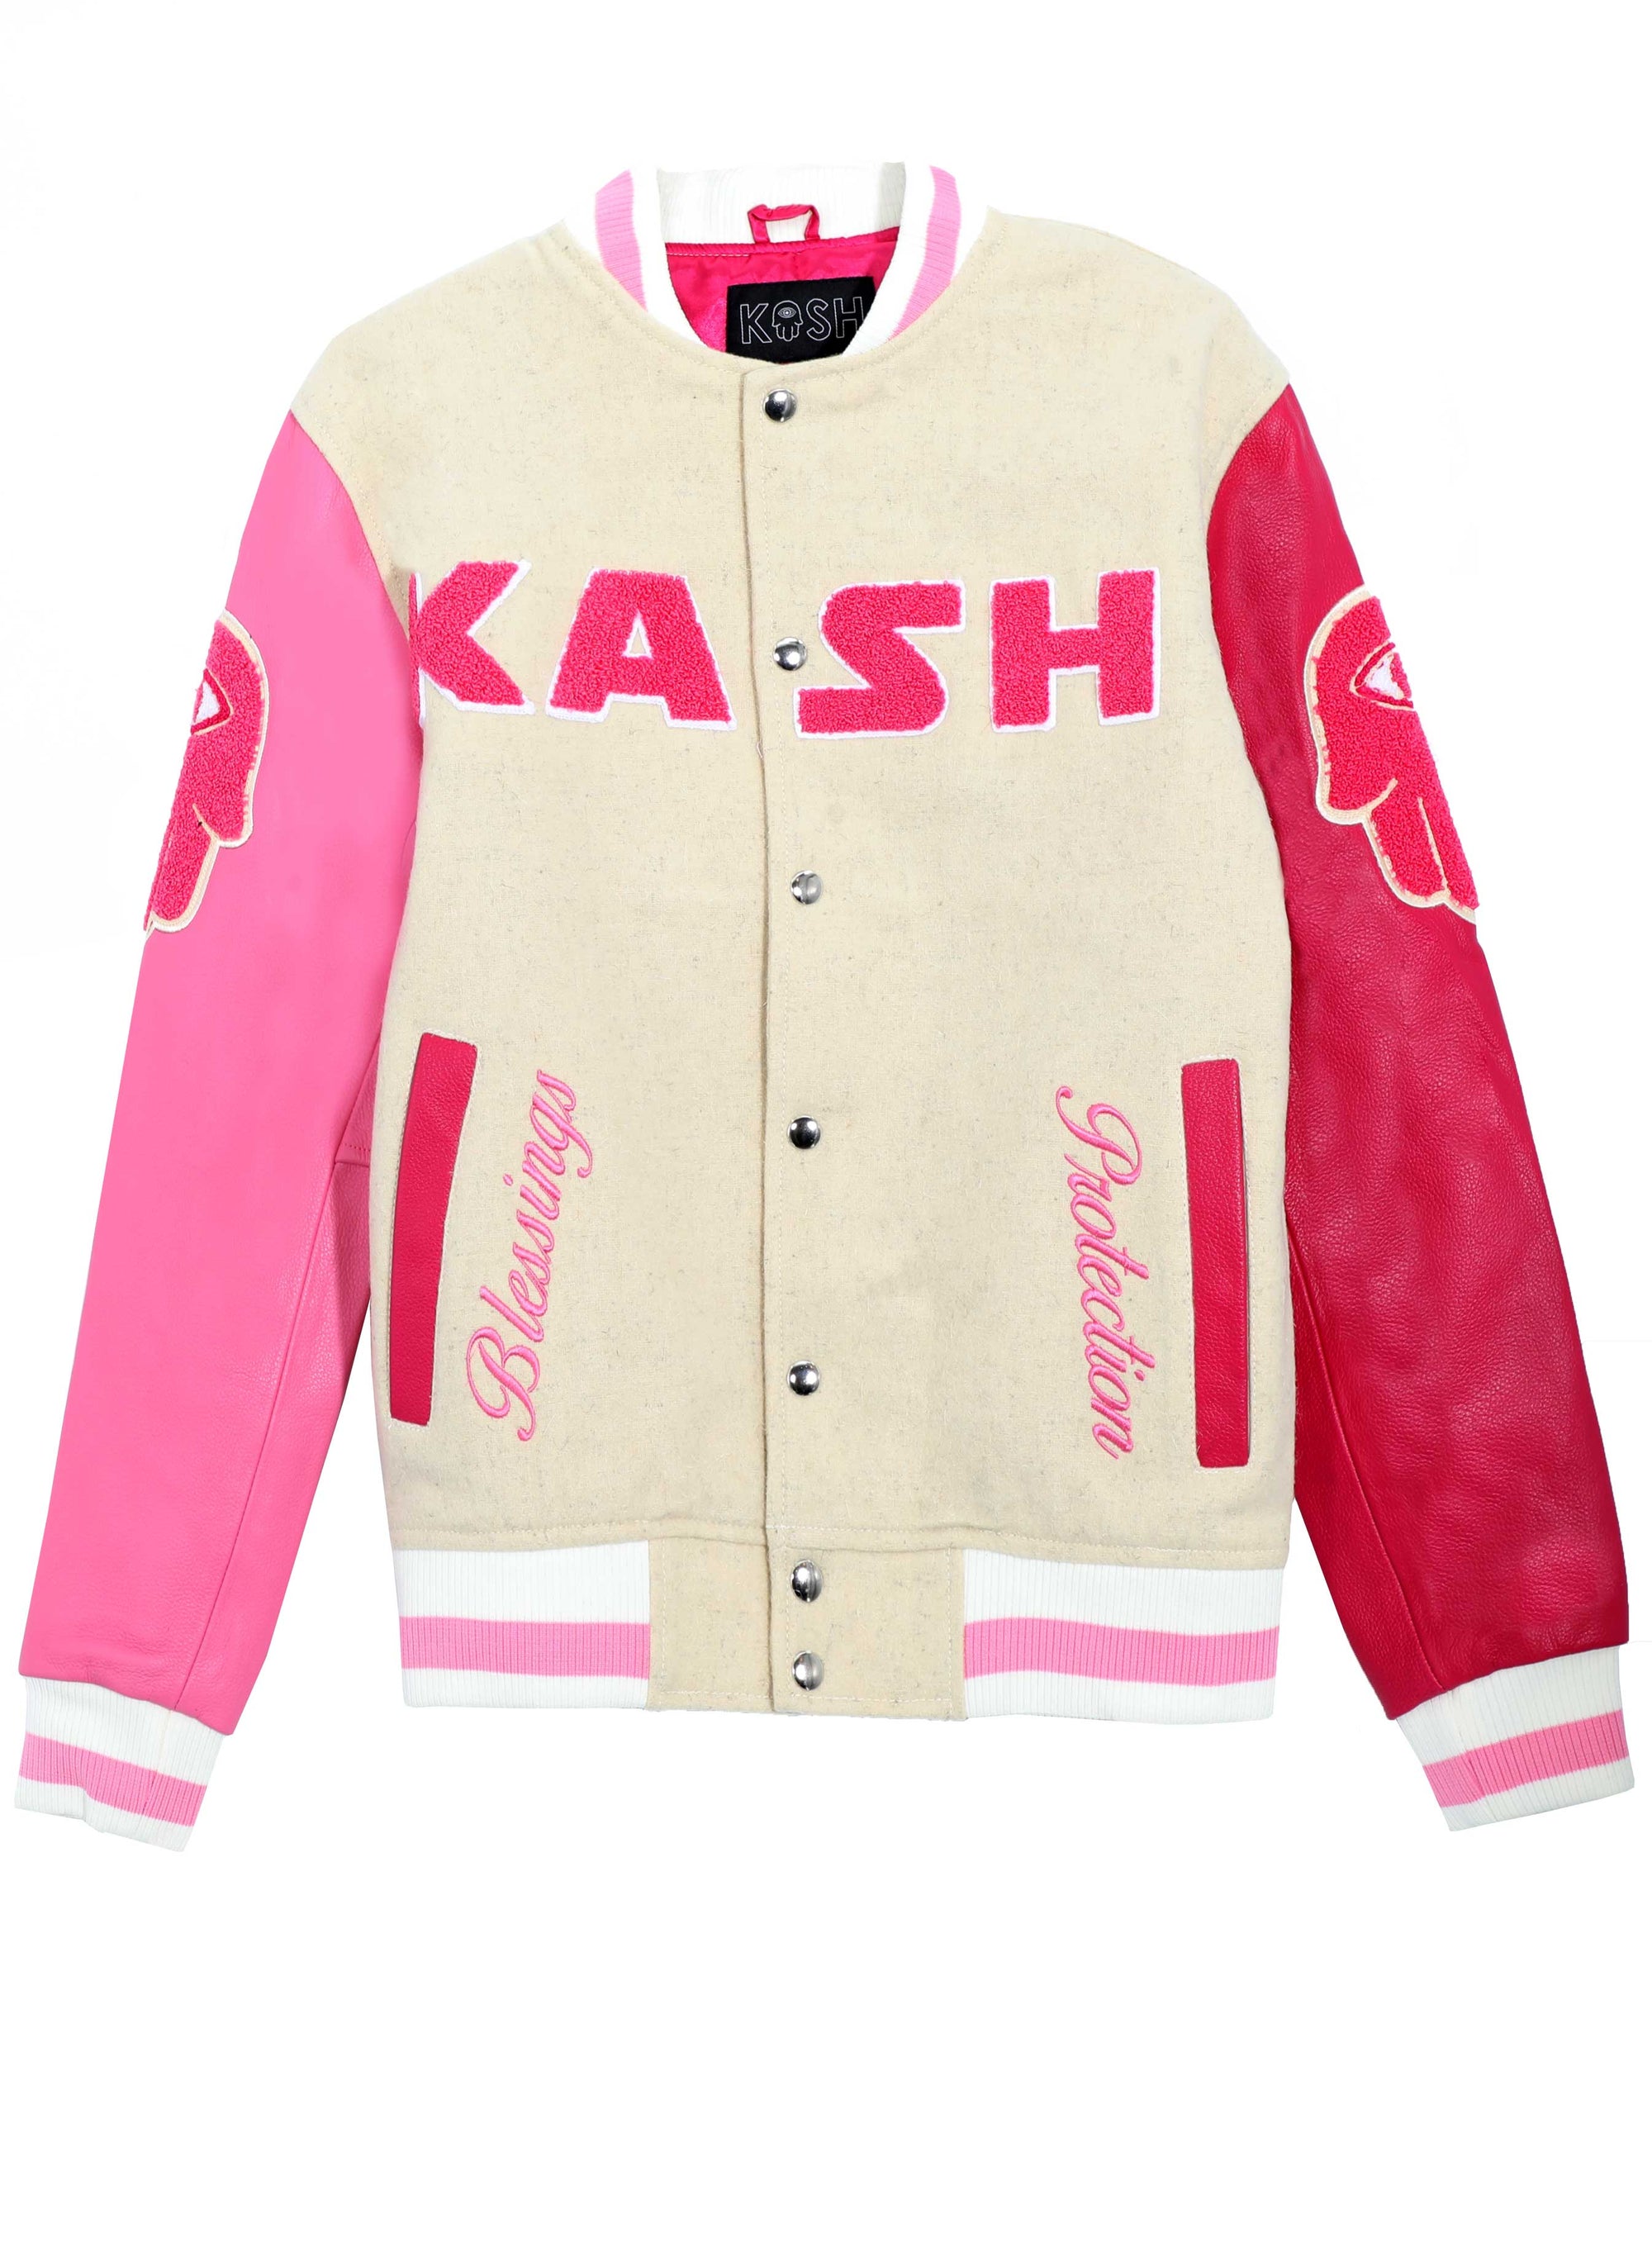 KASH AUTHENTIC LEATHER AND WOOL JACKET WITH CHENILLE DETAILS - PINK W/ CREAM